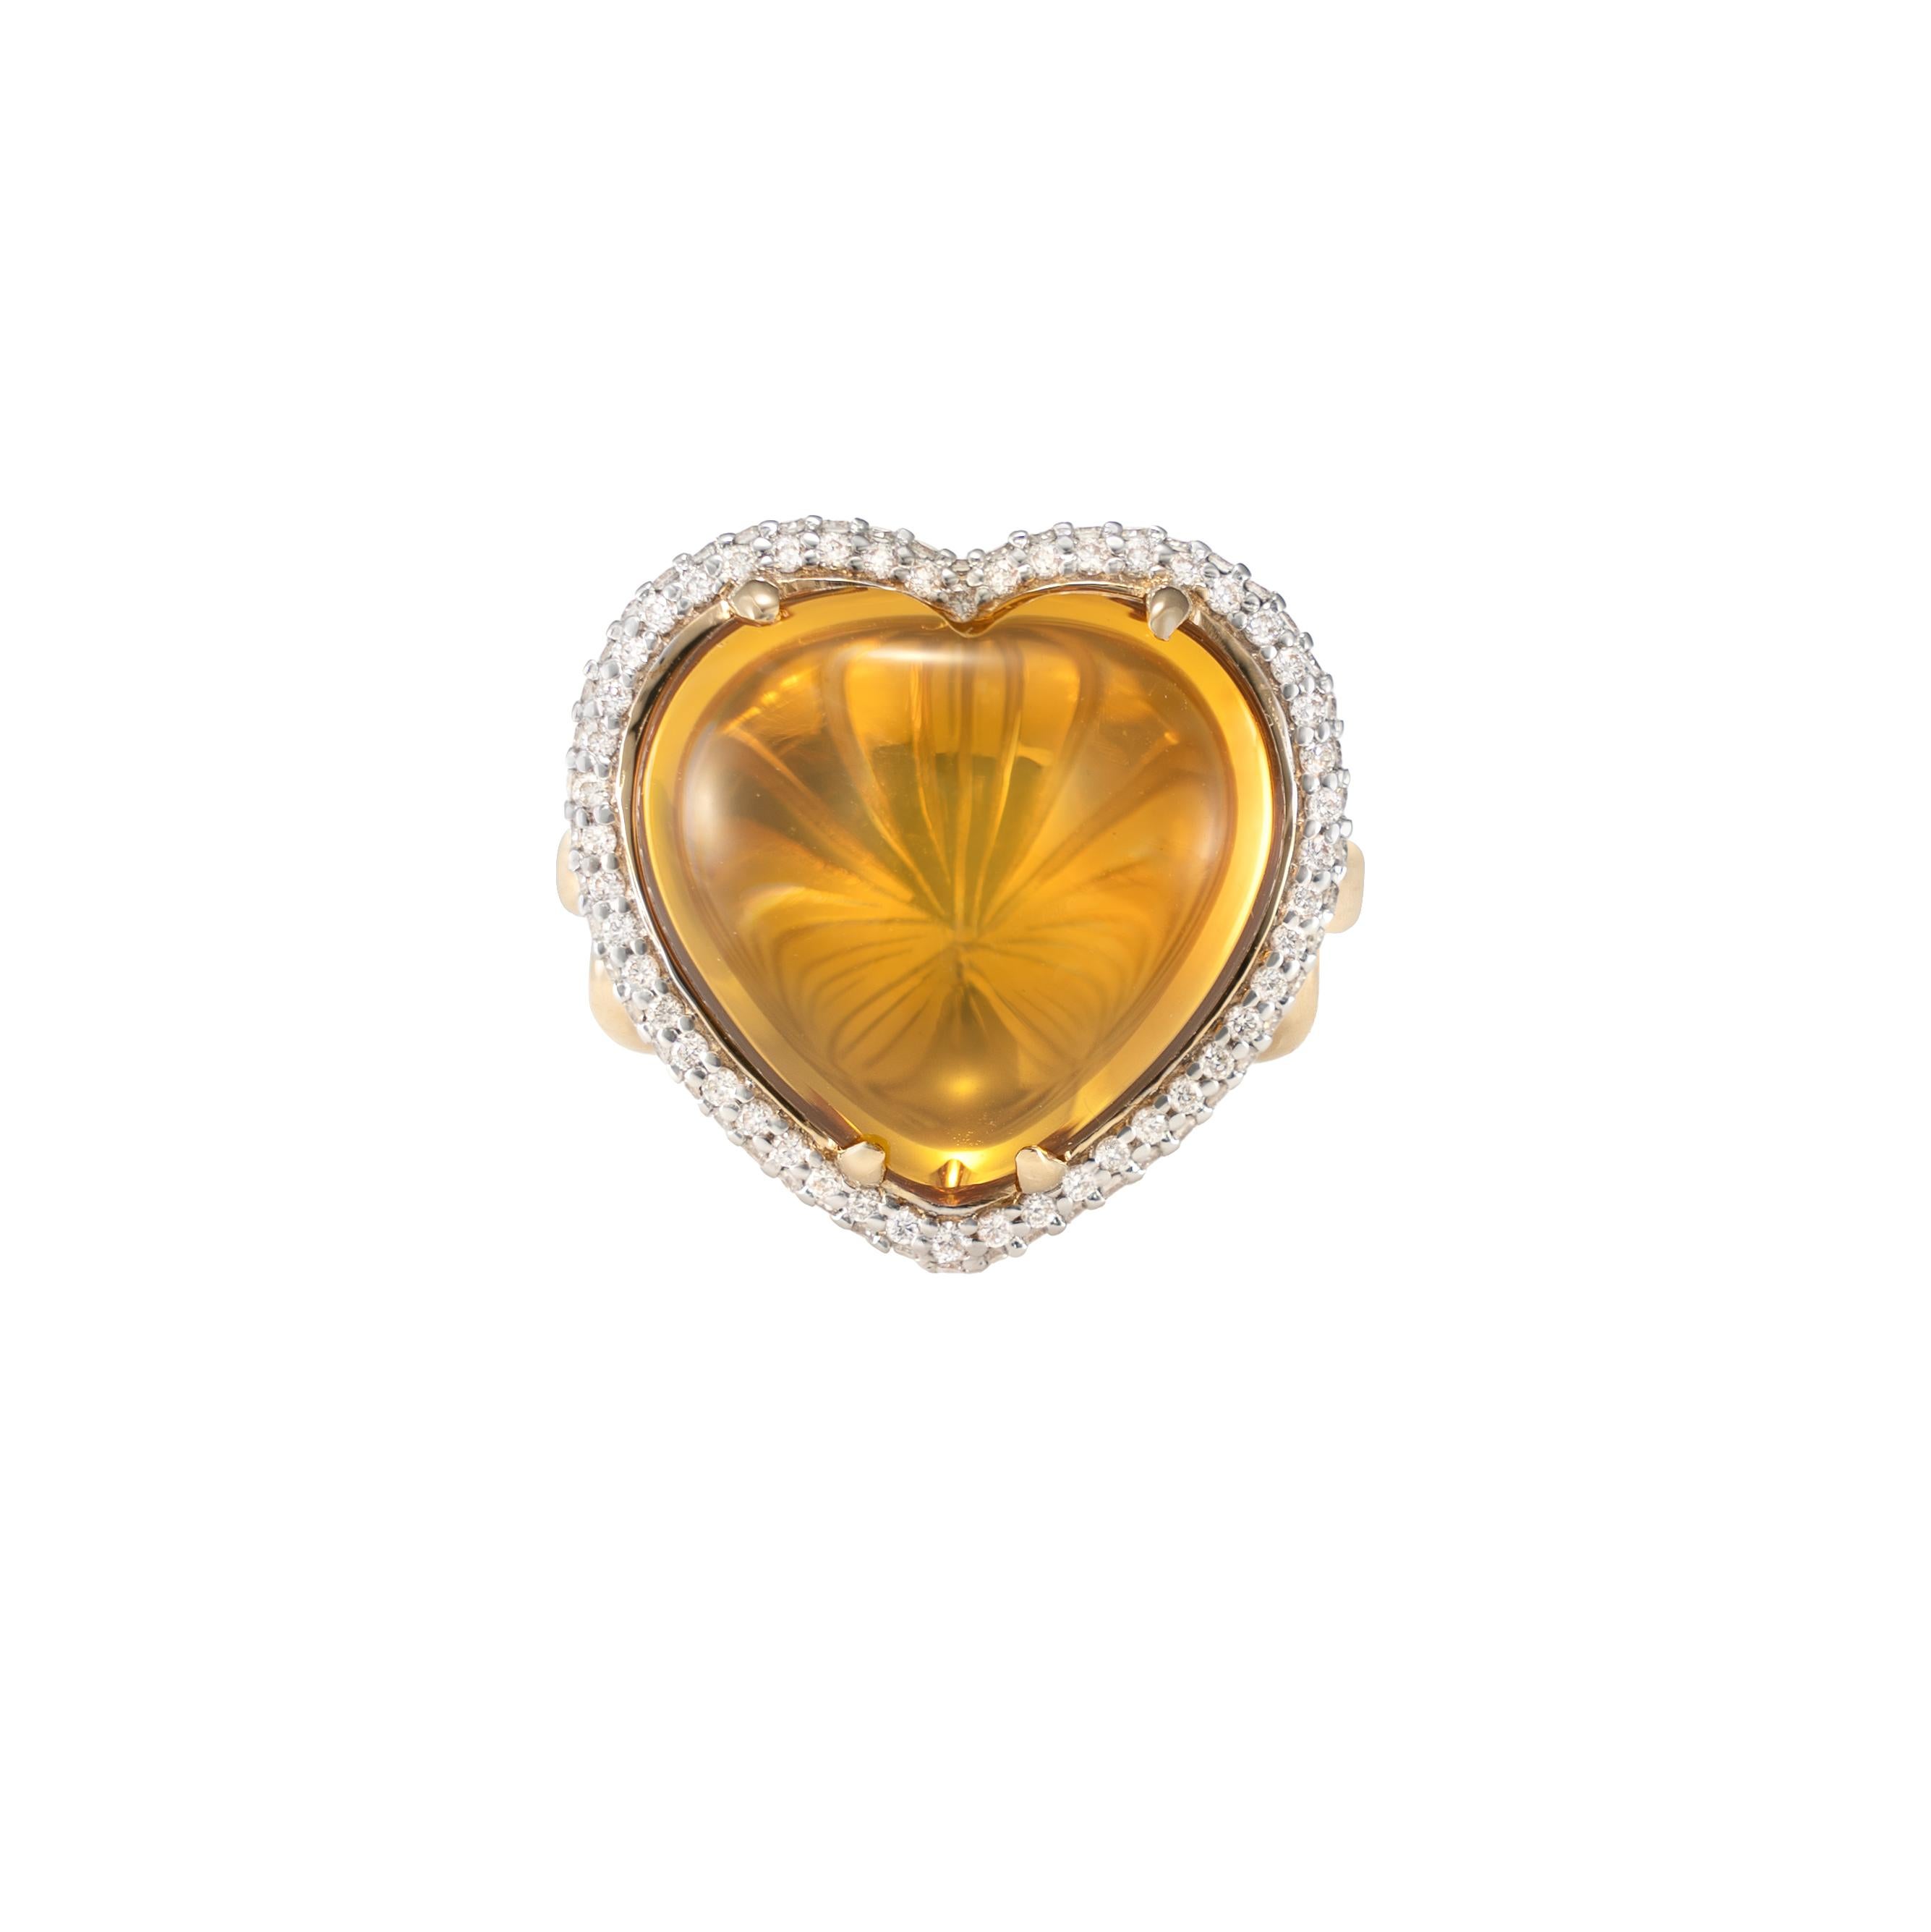 Heart Cut Quartz Ring in 18 Karat Yellow Gold with Sapphire and Diamond. For Sale